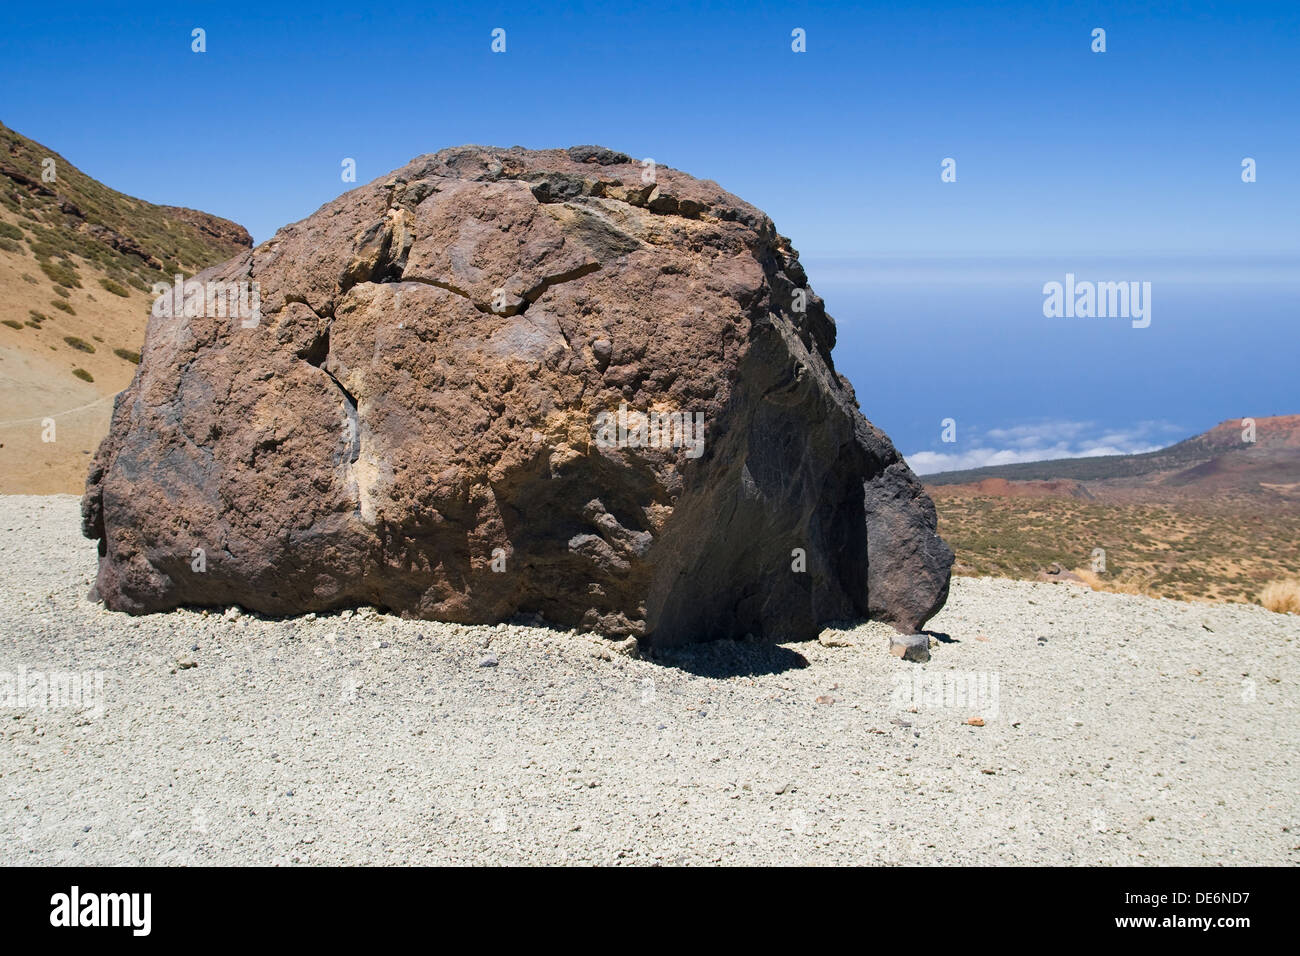 An accretion ball, a rock formed of solidified lava, on the slopes of Mount Teide, Tenerife, Canary Islands. Stock Photo